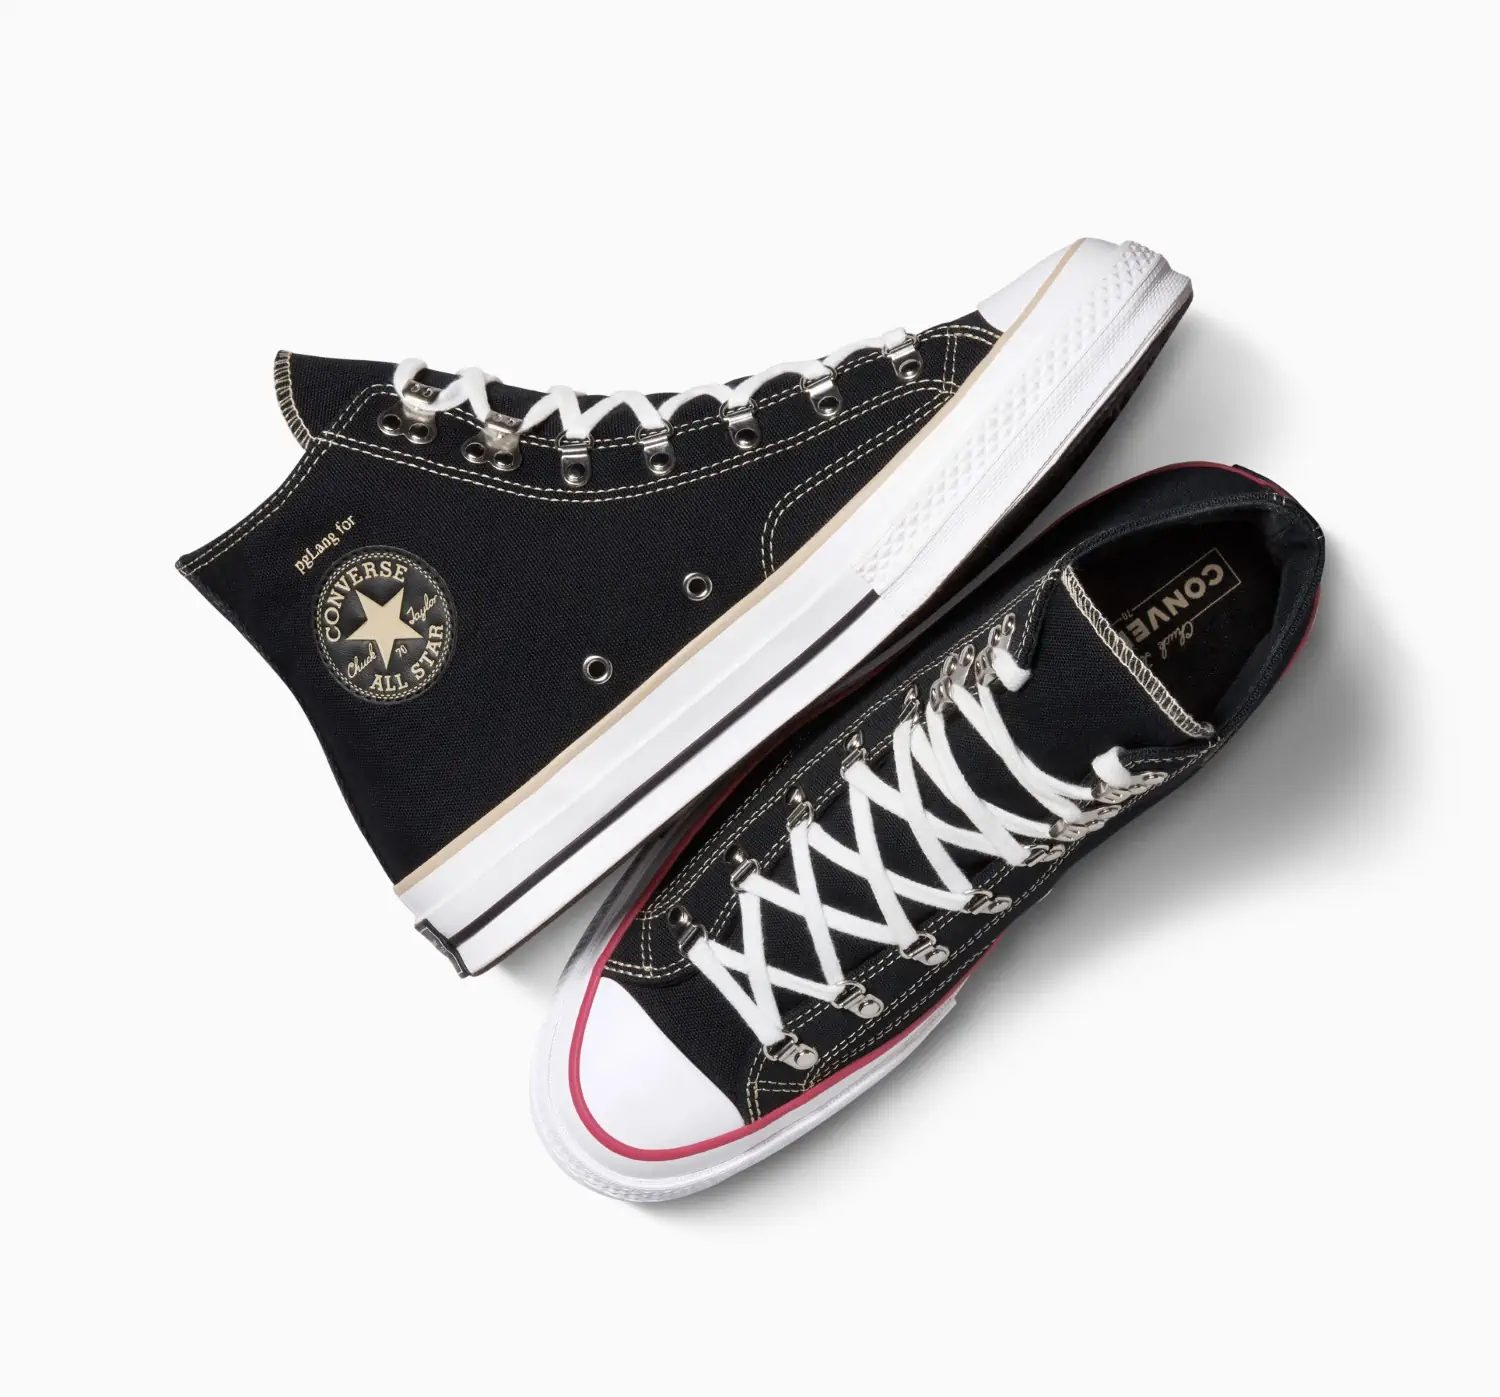 Converse x pgLang release second collaboration